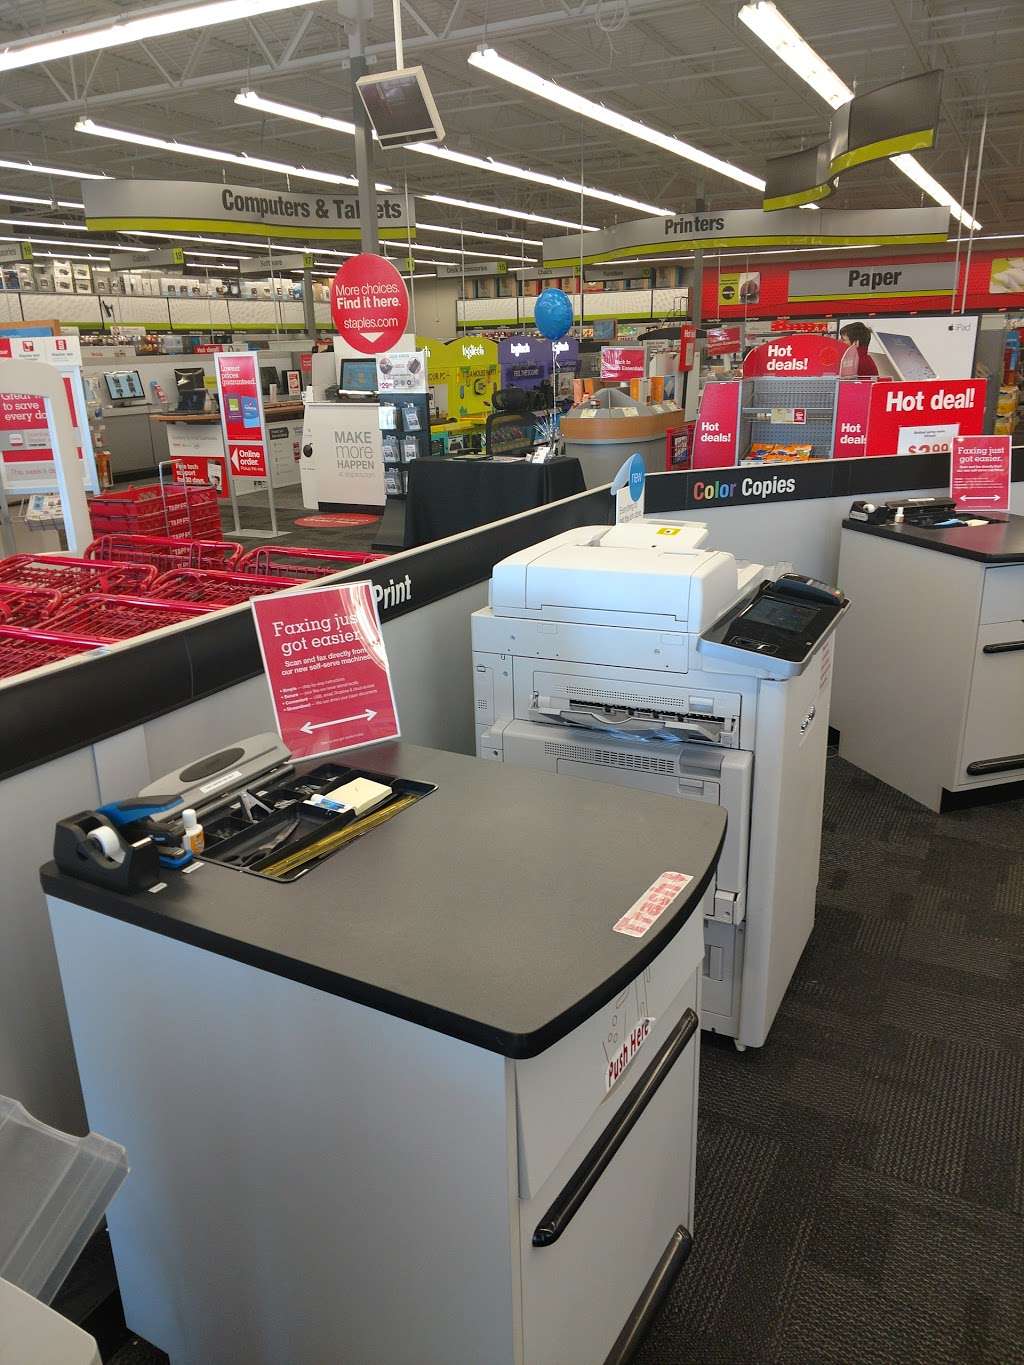 Staples | 654 North West End Blvd, Quakertown, PA 18951, USA | Phone: (215) 538-8812